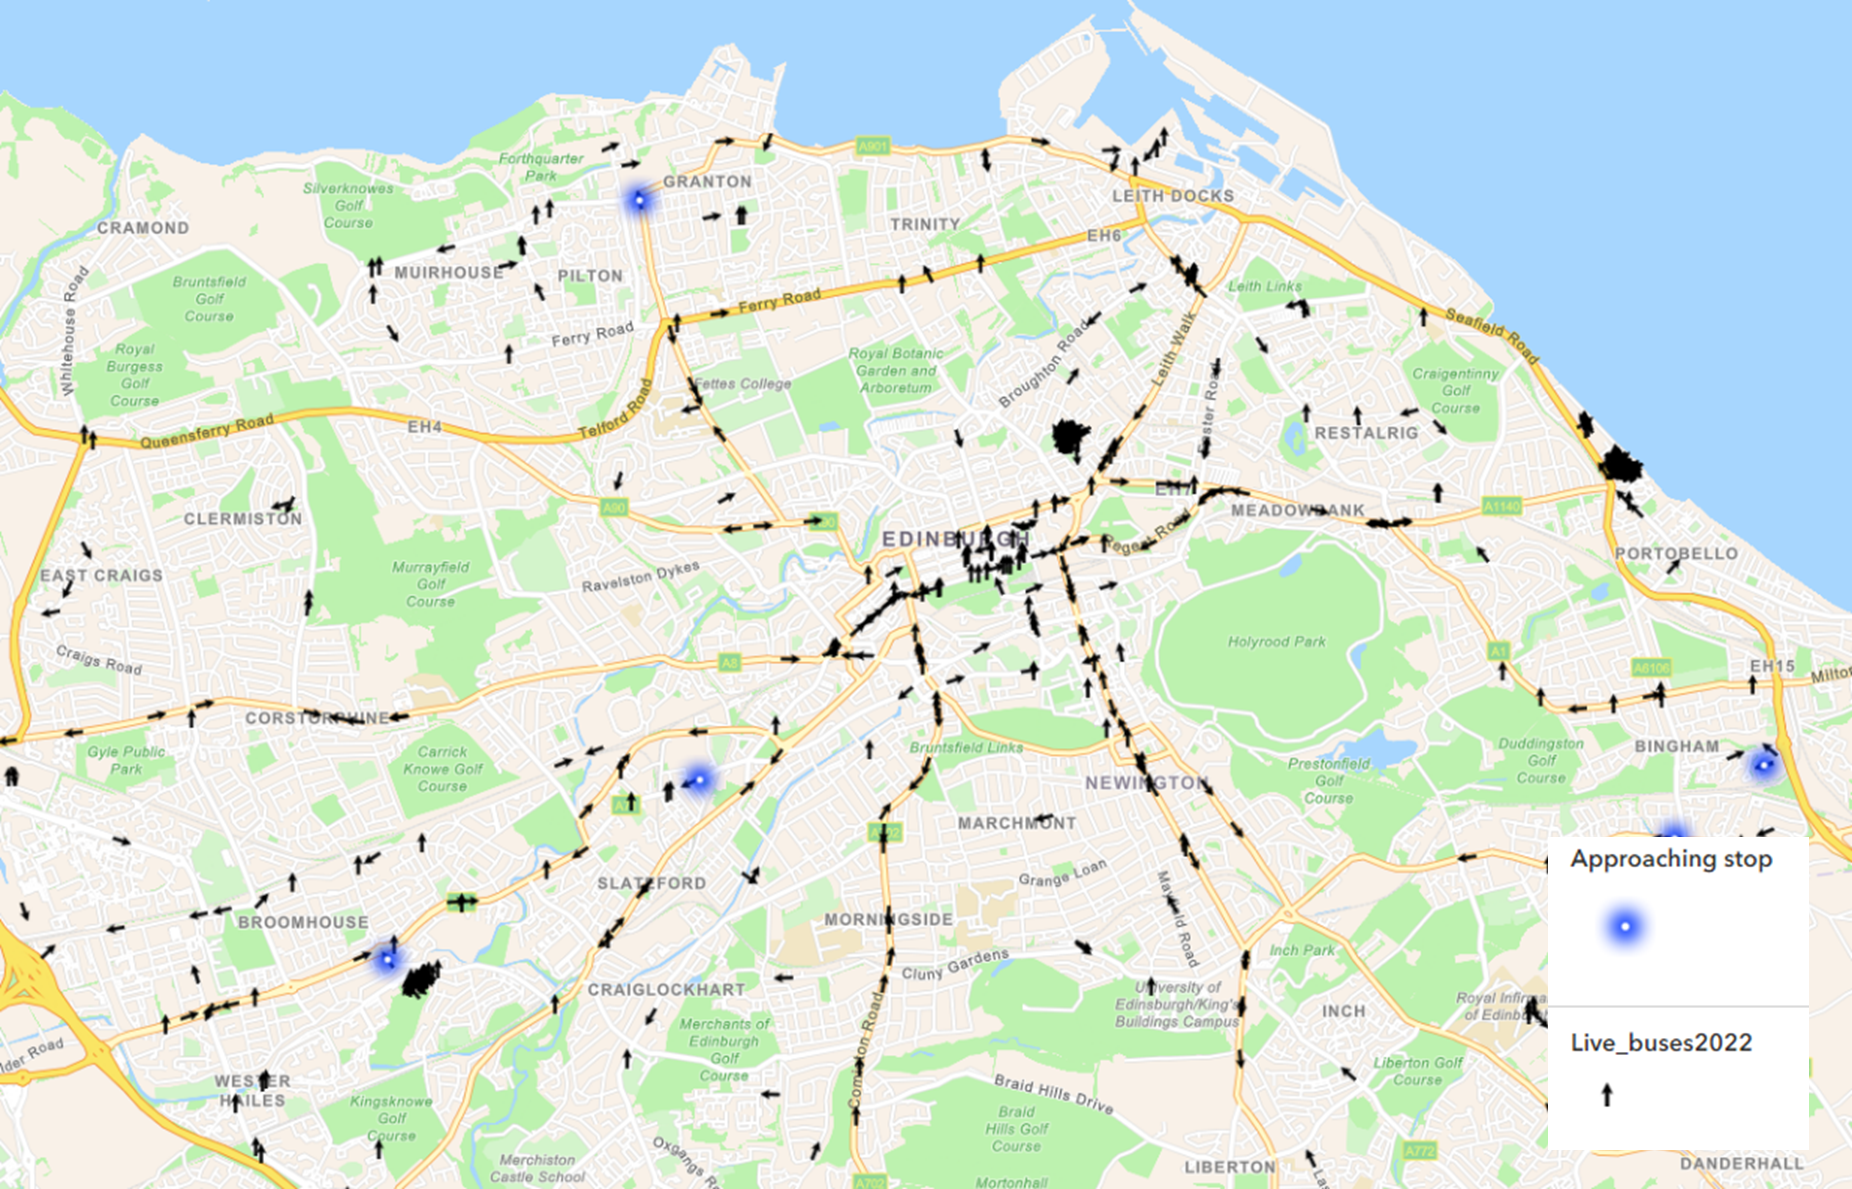 A screenshot showing the output of the Velocity Analytic. All buses are symbolised by an arrow in the direction of their heading. Any buses approaching their stops are symbolised with a blue firefly